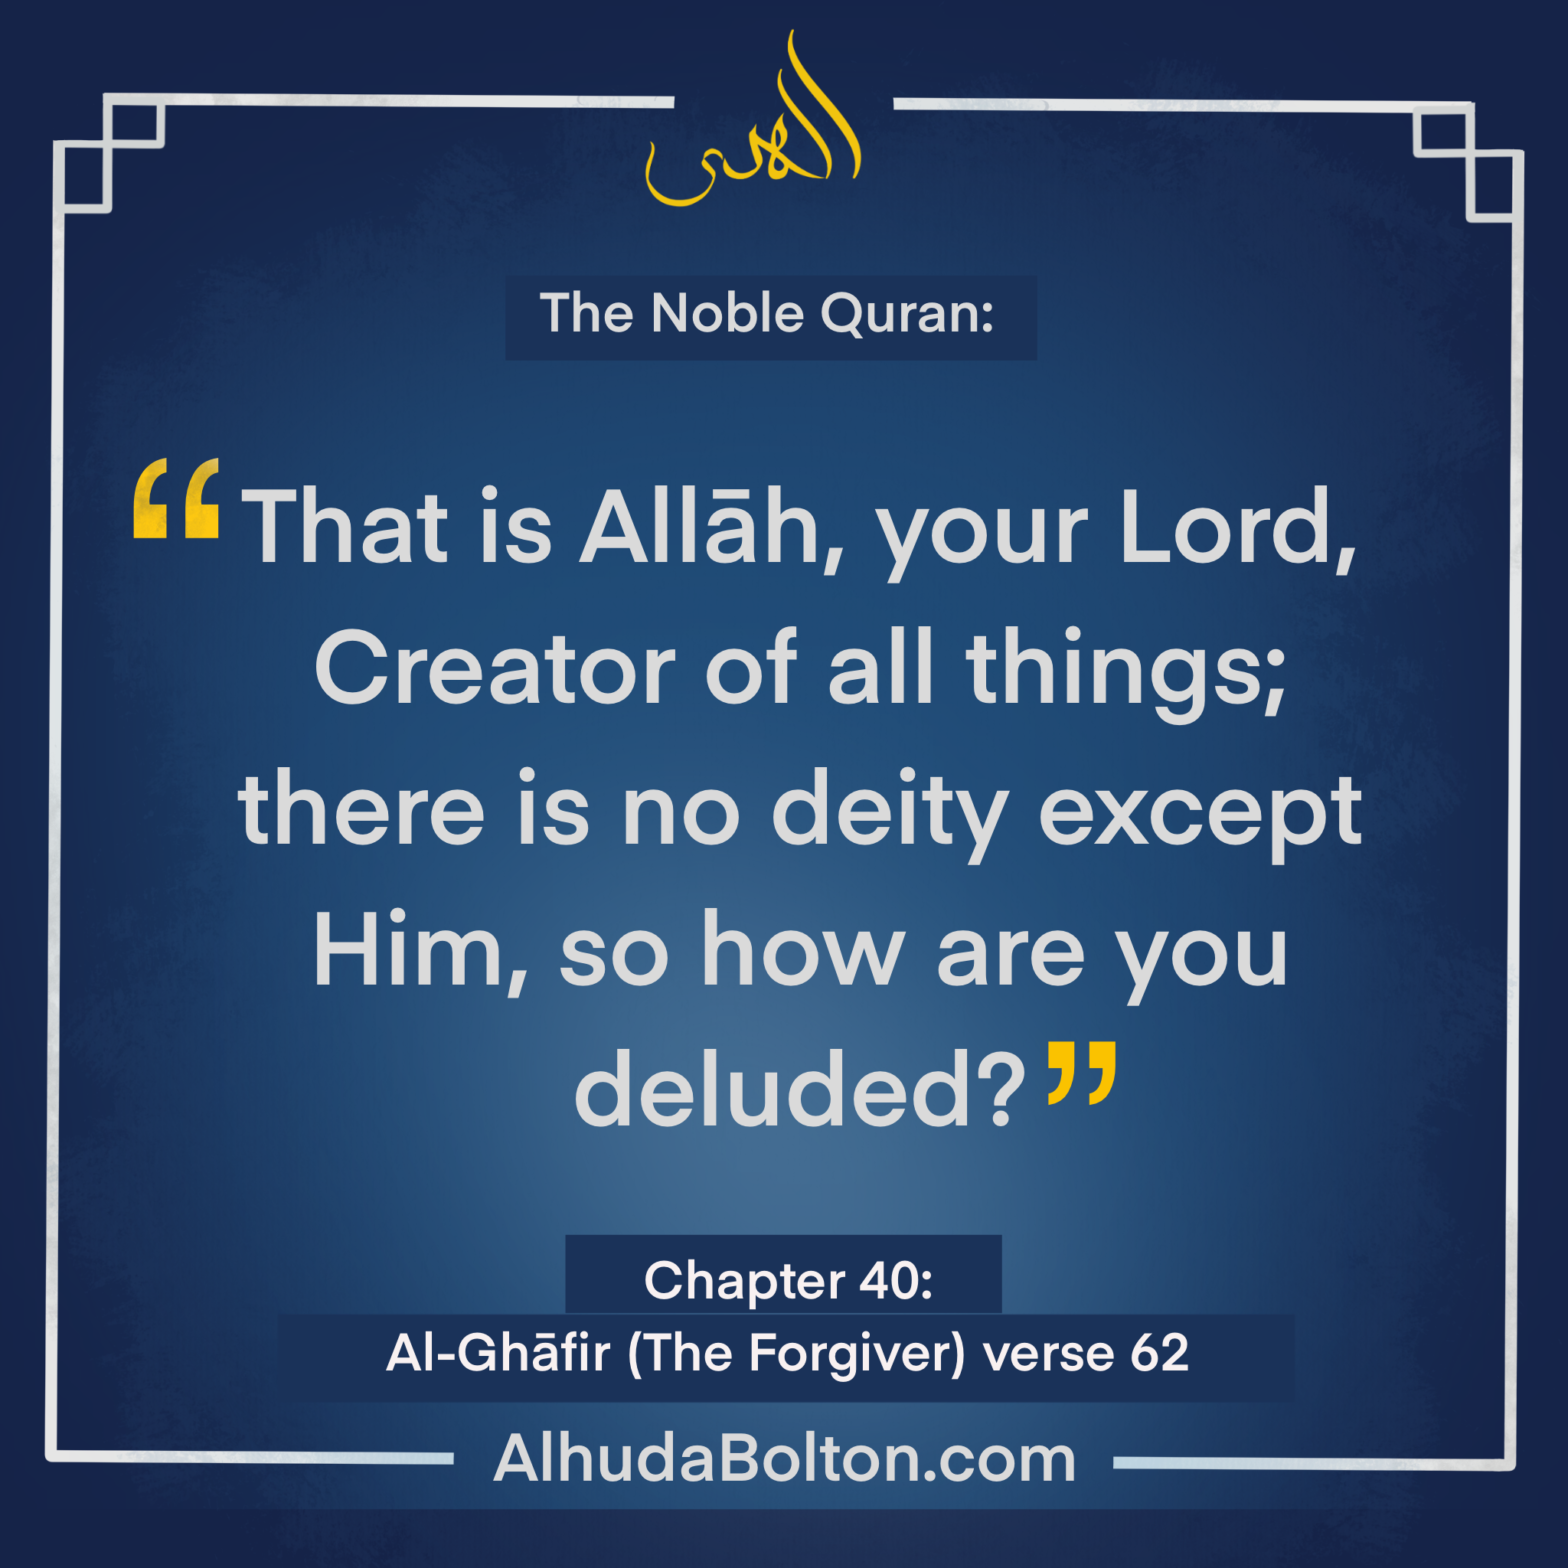 Quran: Our Lord